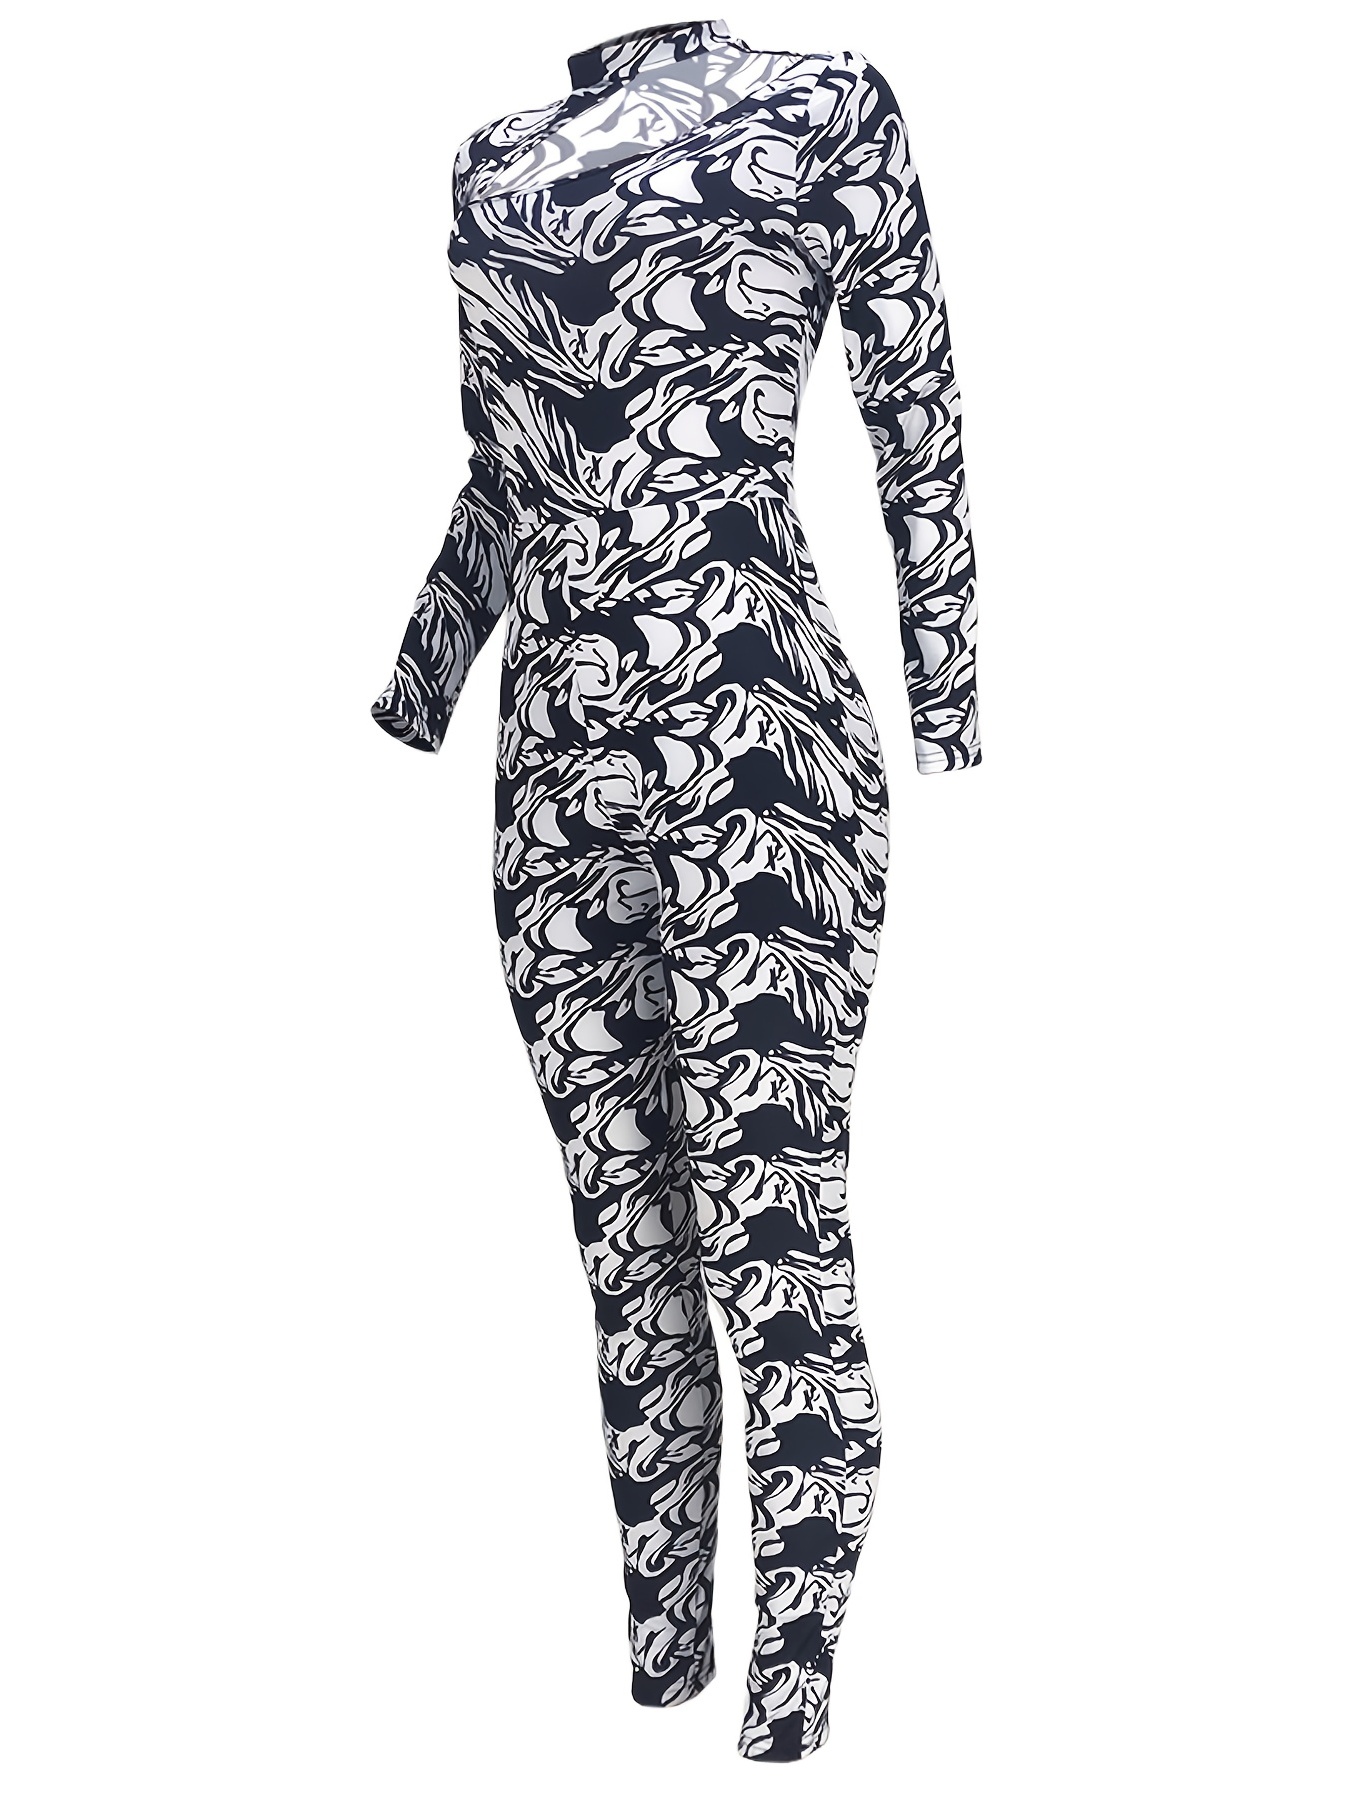 Floral Print Cut Out Skinny Jumpsuit, Casual Long Sleeve Stretchy